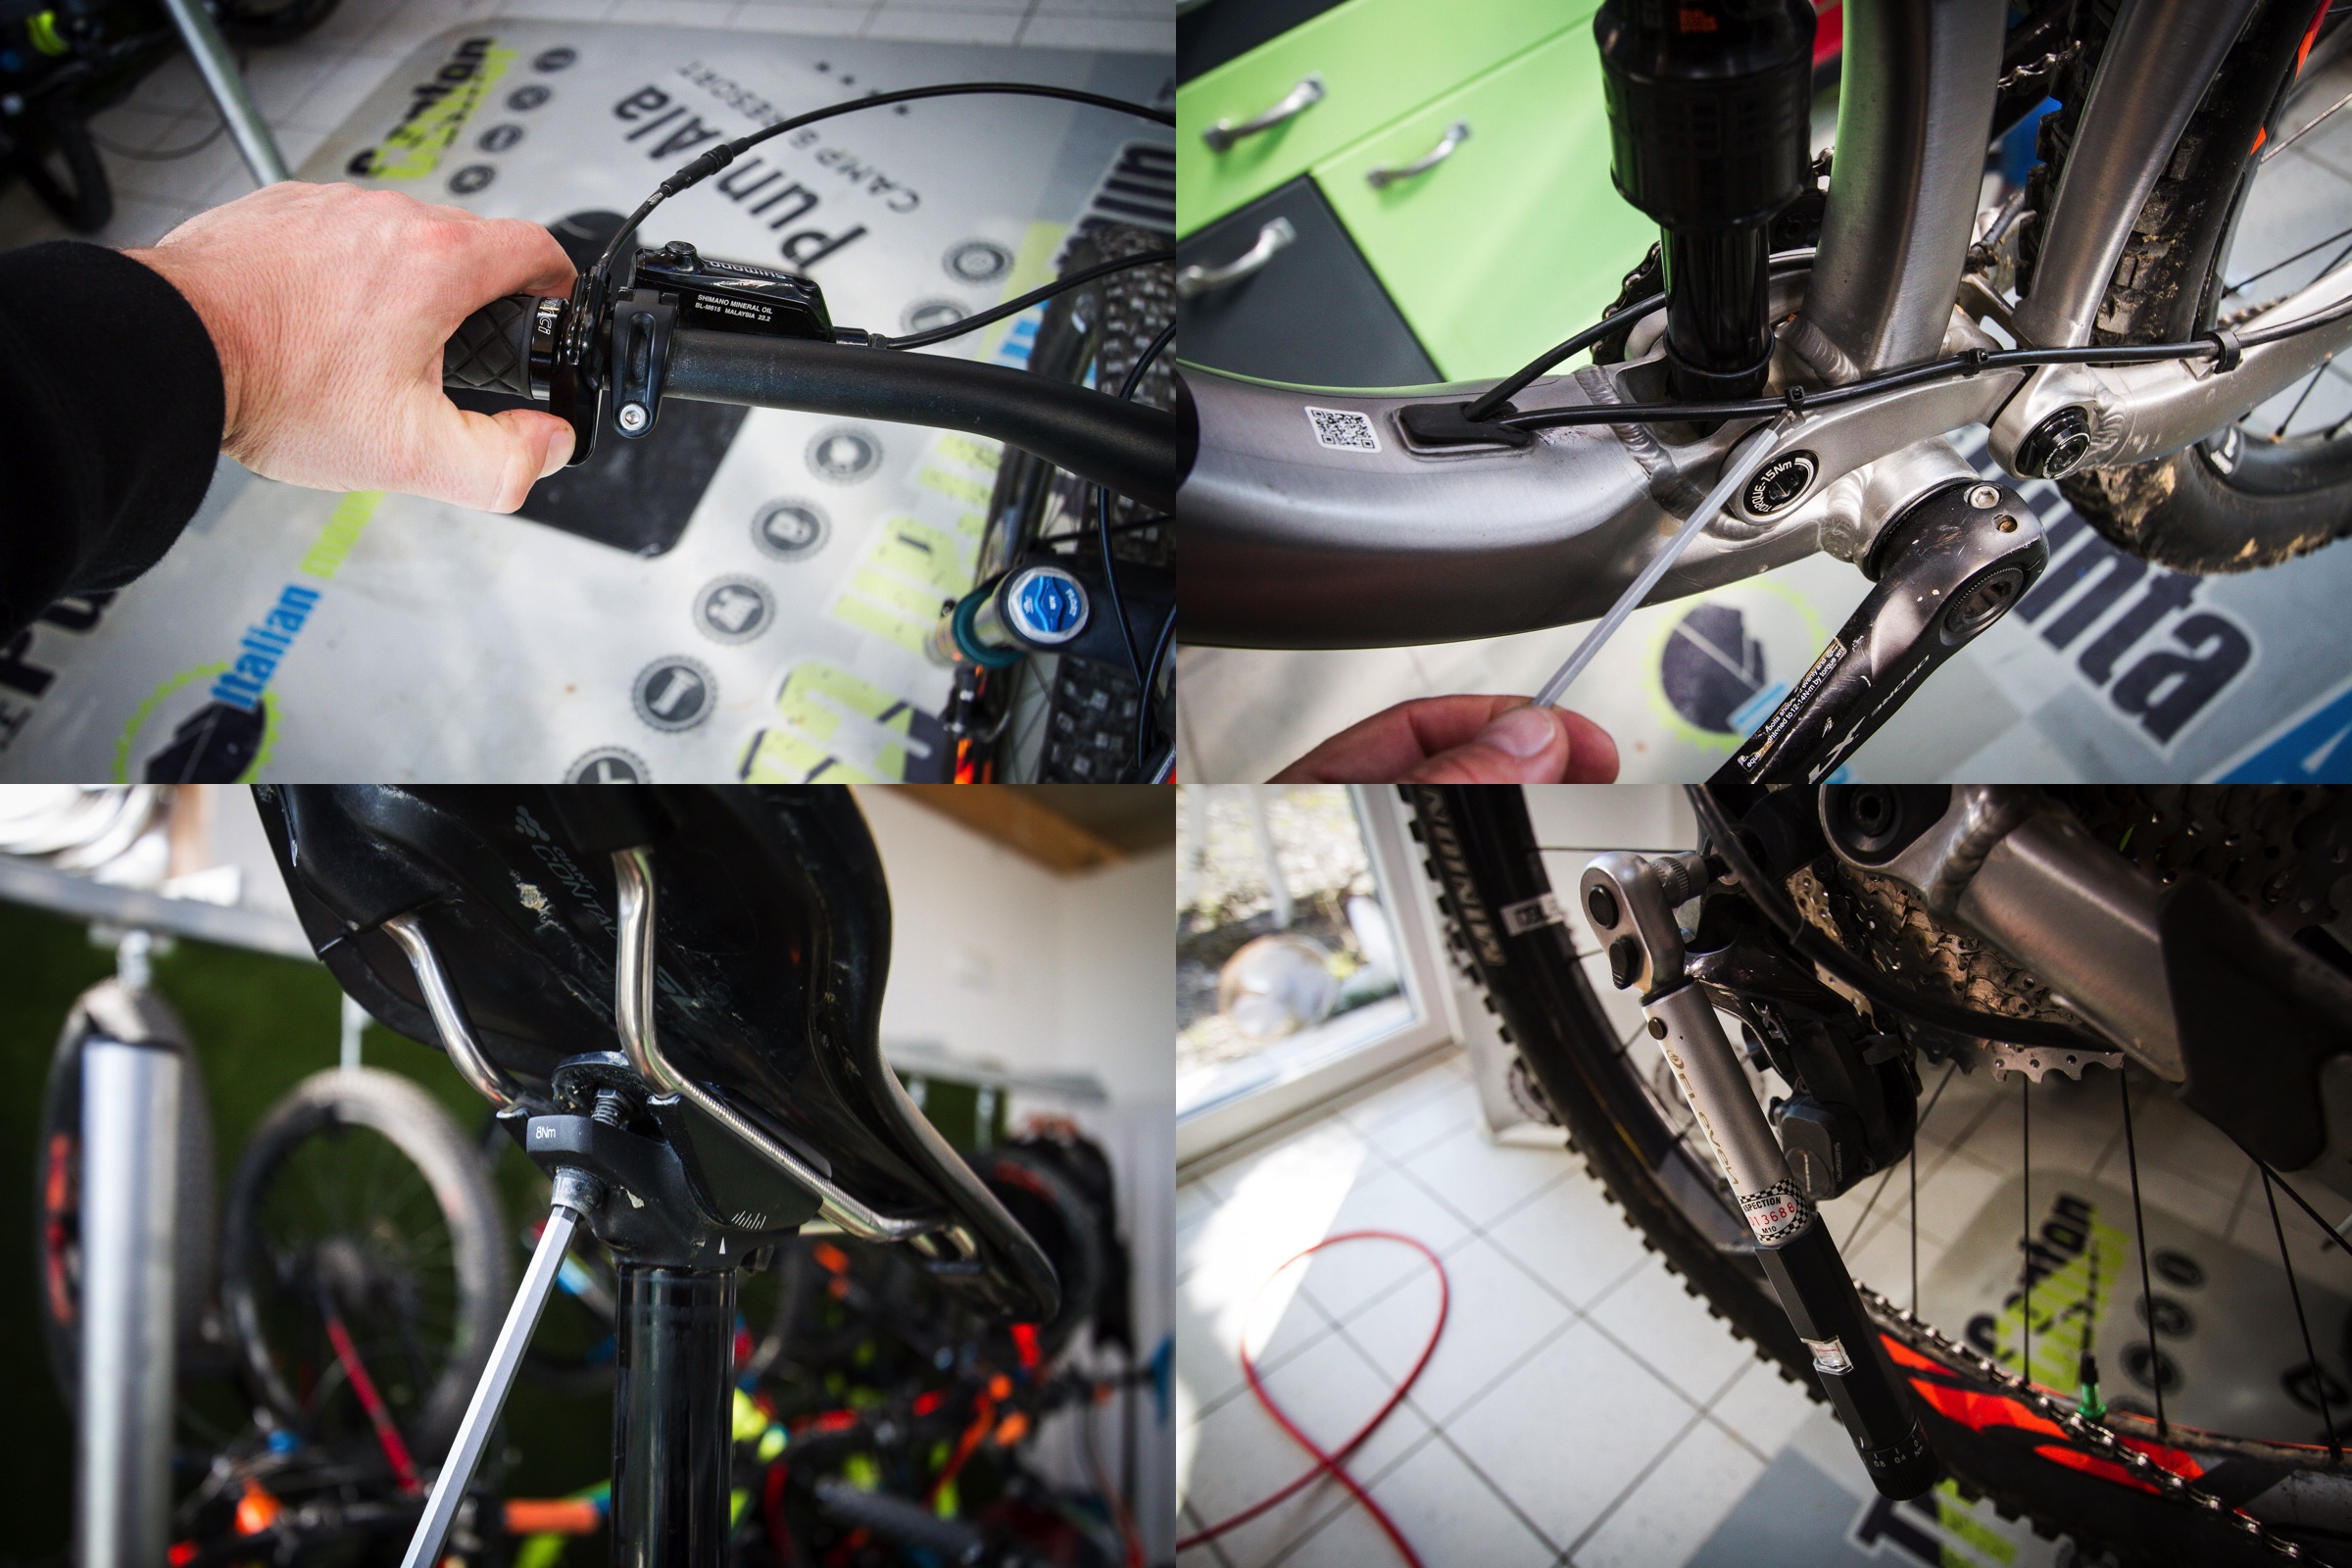 The last things to check include the seat post bolts, the action of the remote for the seat post and that all the cables are in the right place and tied down correctly. We recommend one final pass with the torque wrench.